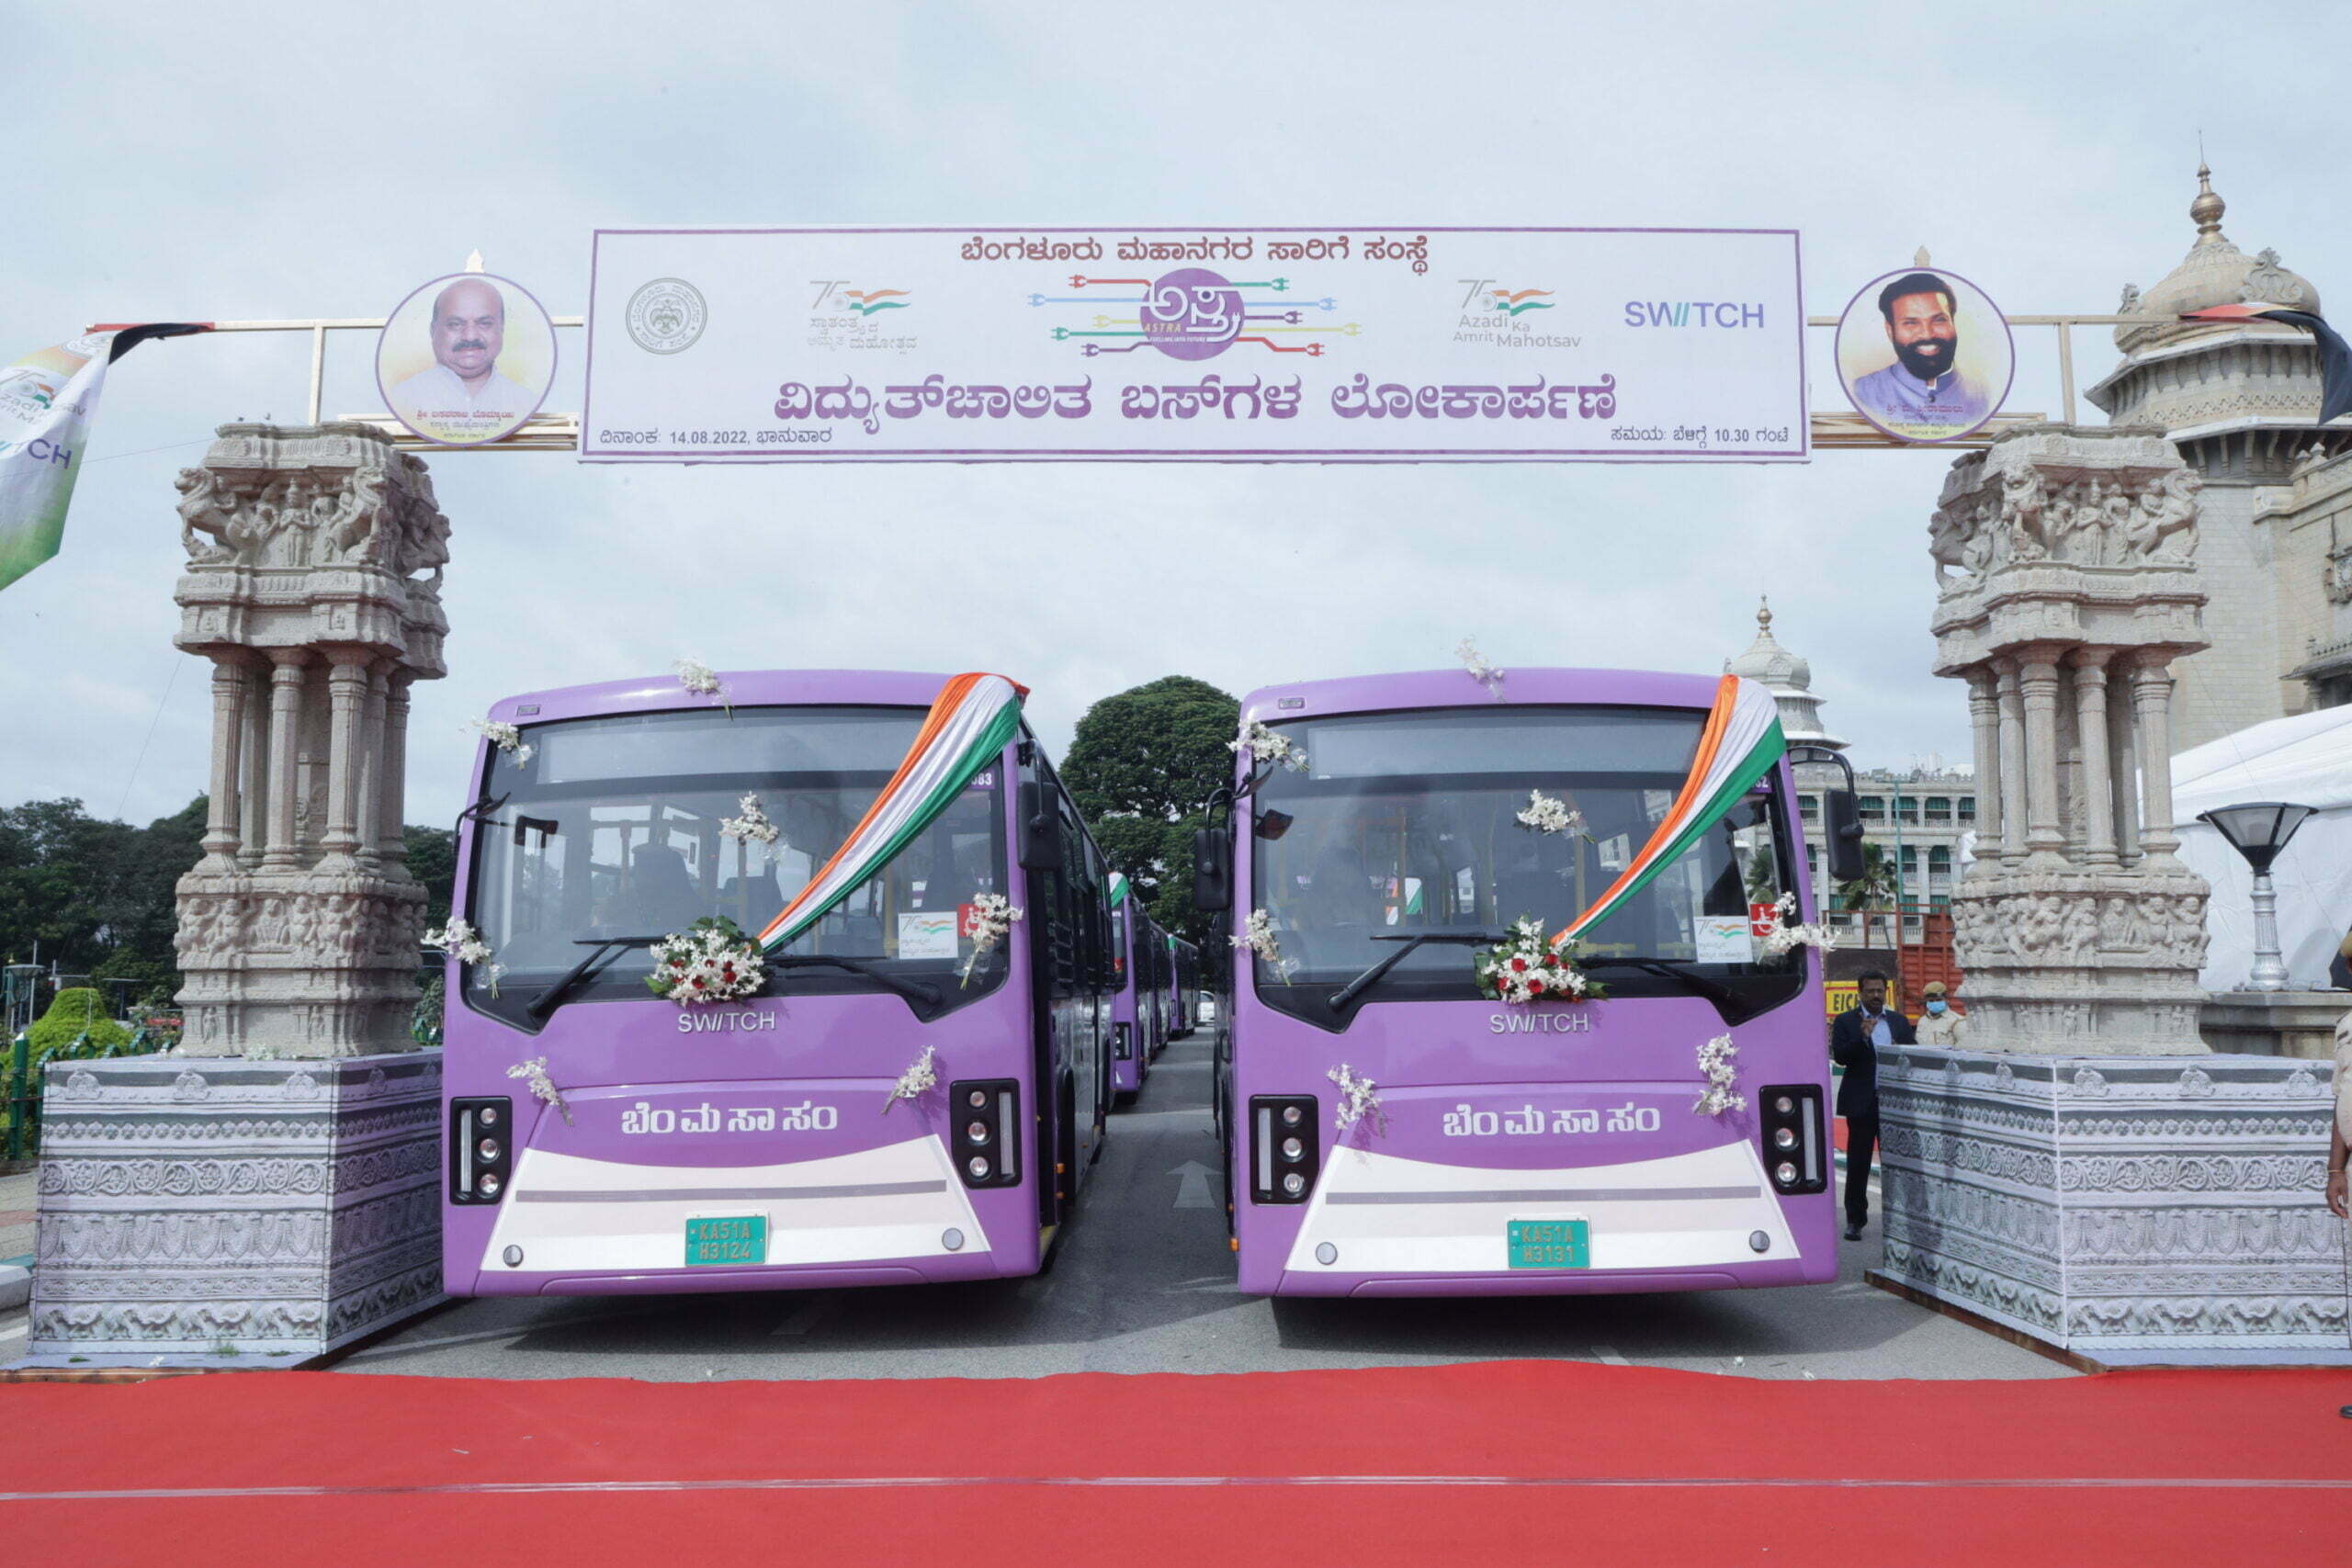 Switch EiV 12 buses flagged off in Bengaluru